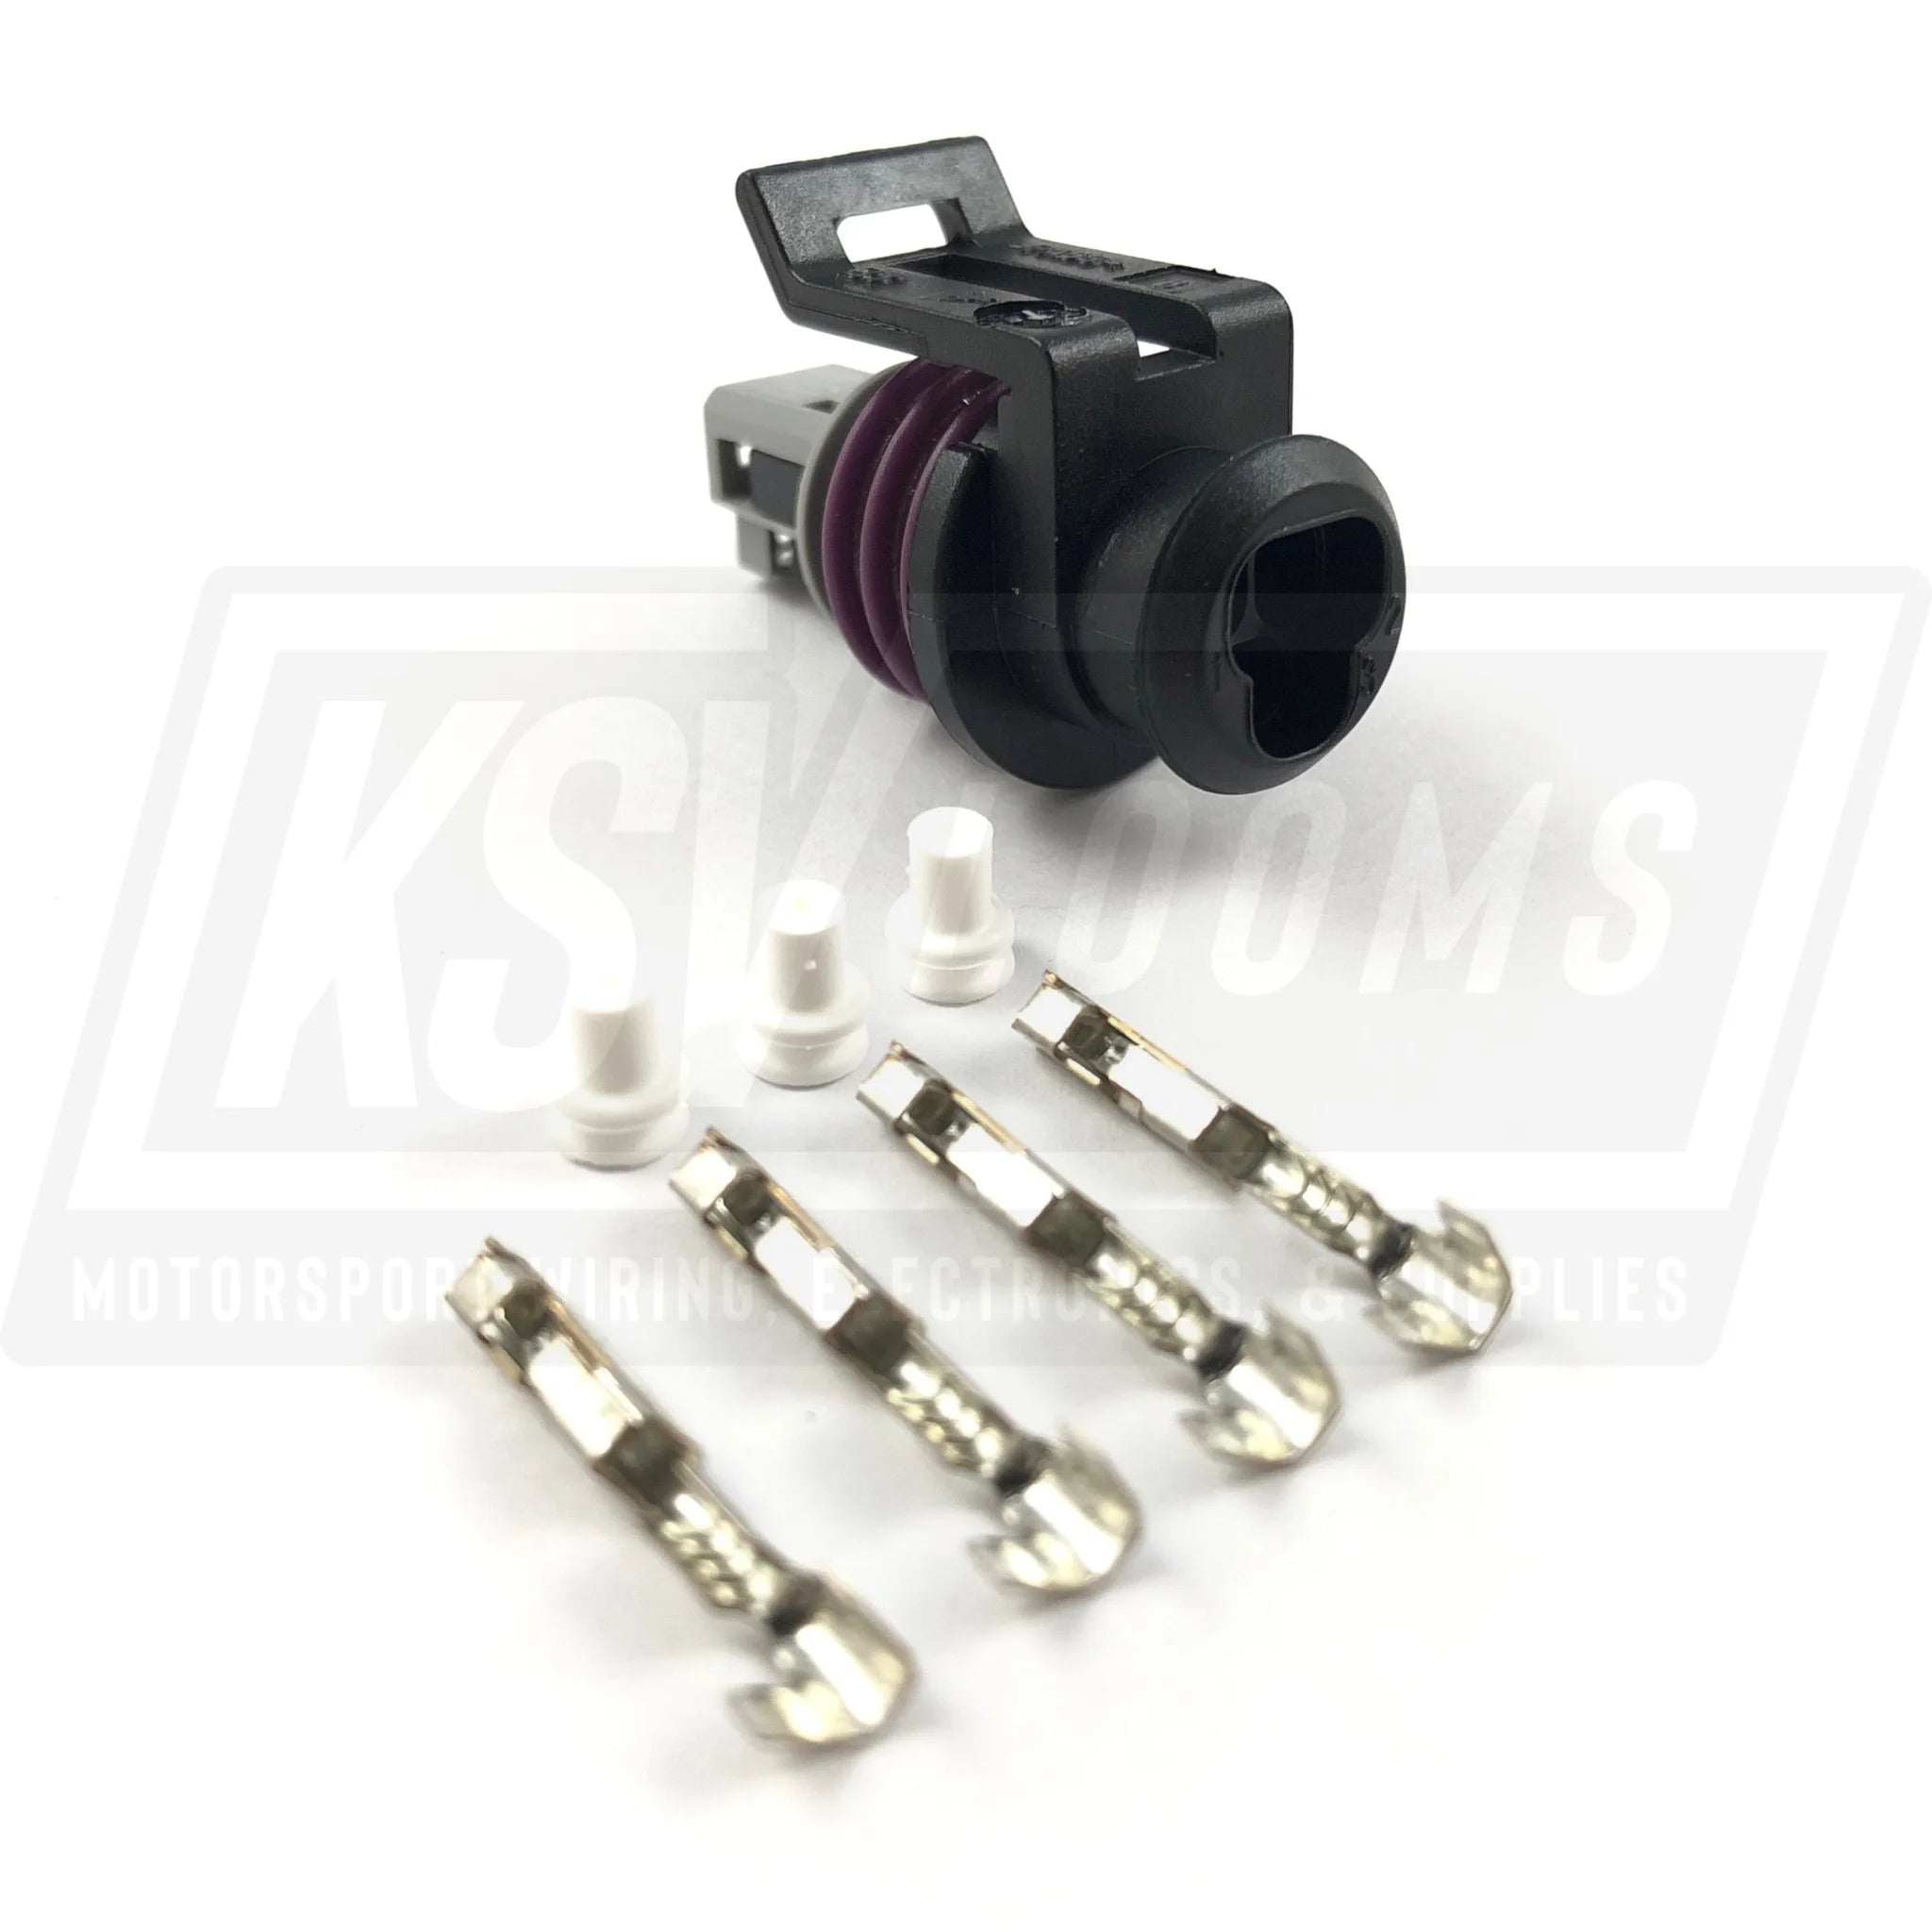 3-Way Connector Kit For Rife 200 Psi Pressure Transducer 1/8’ Npt (52-200Psi)